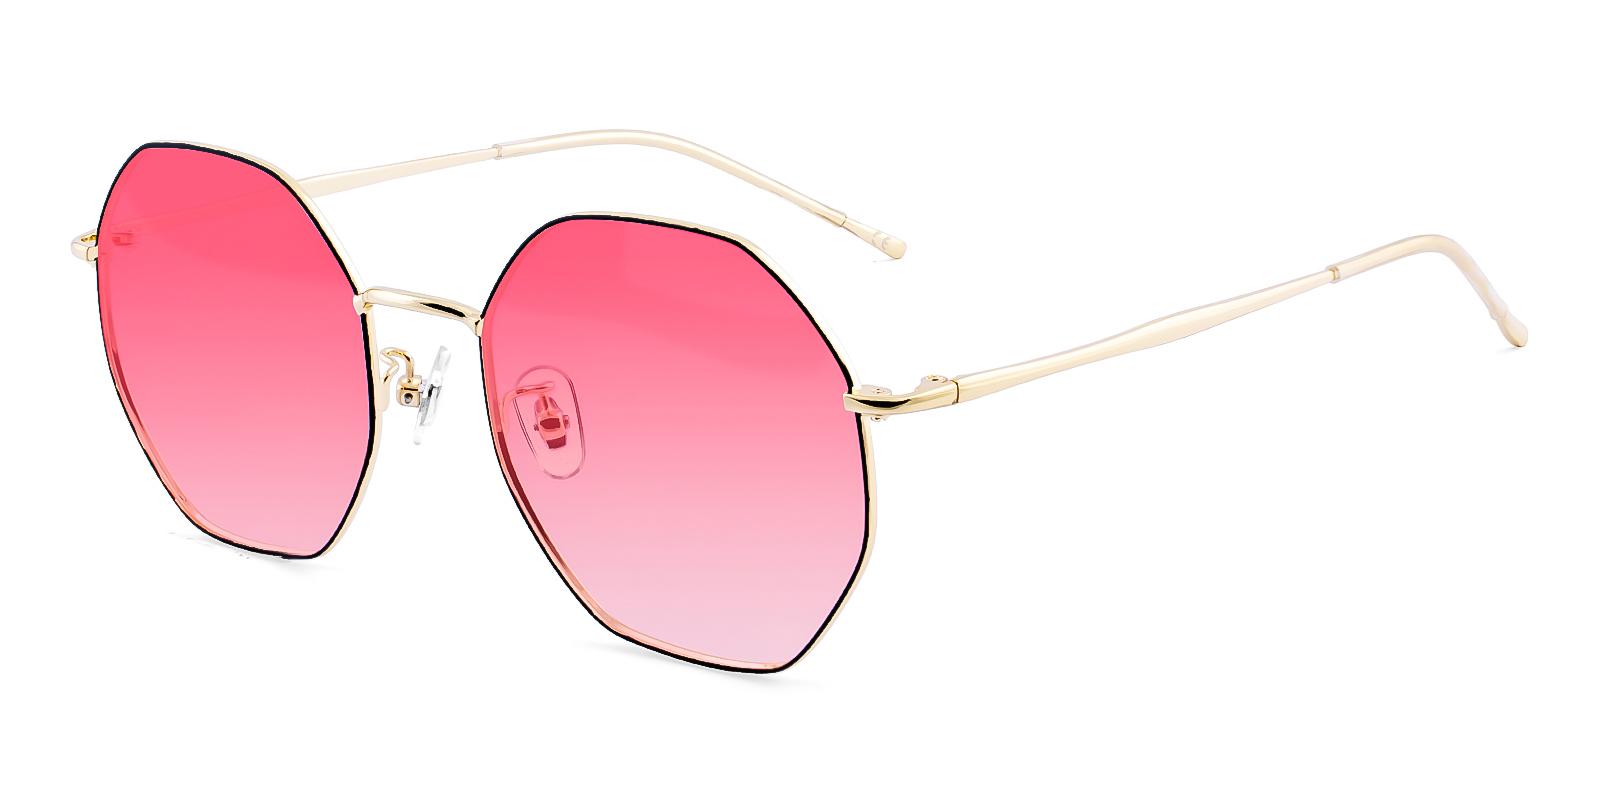 Sarcile Gold Metal NosePads , Sunglasses Frames from ABBE Glasses